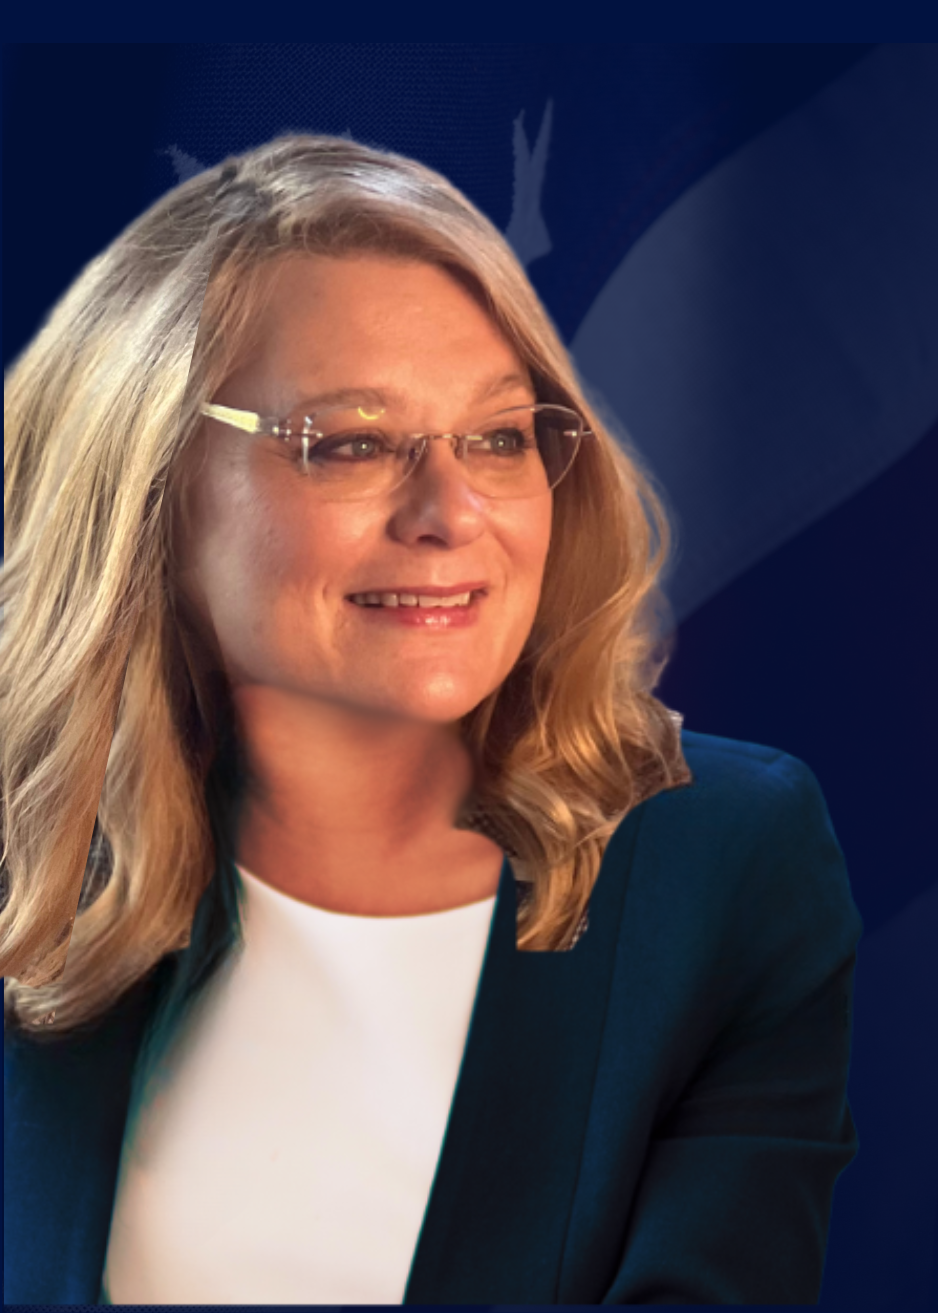 Nicki Kelley, a governing board member for the East Valley Institute of Technology, is running for Maricopa County School Superintendent candidate with the Republican party.